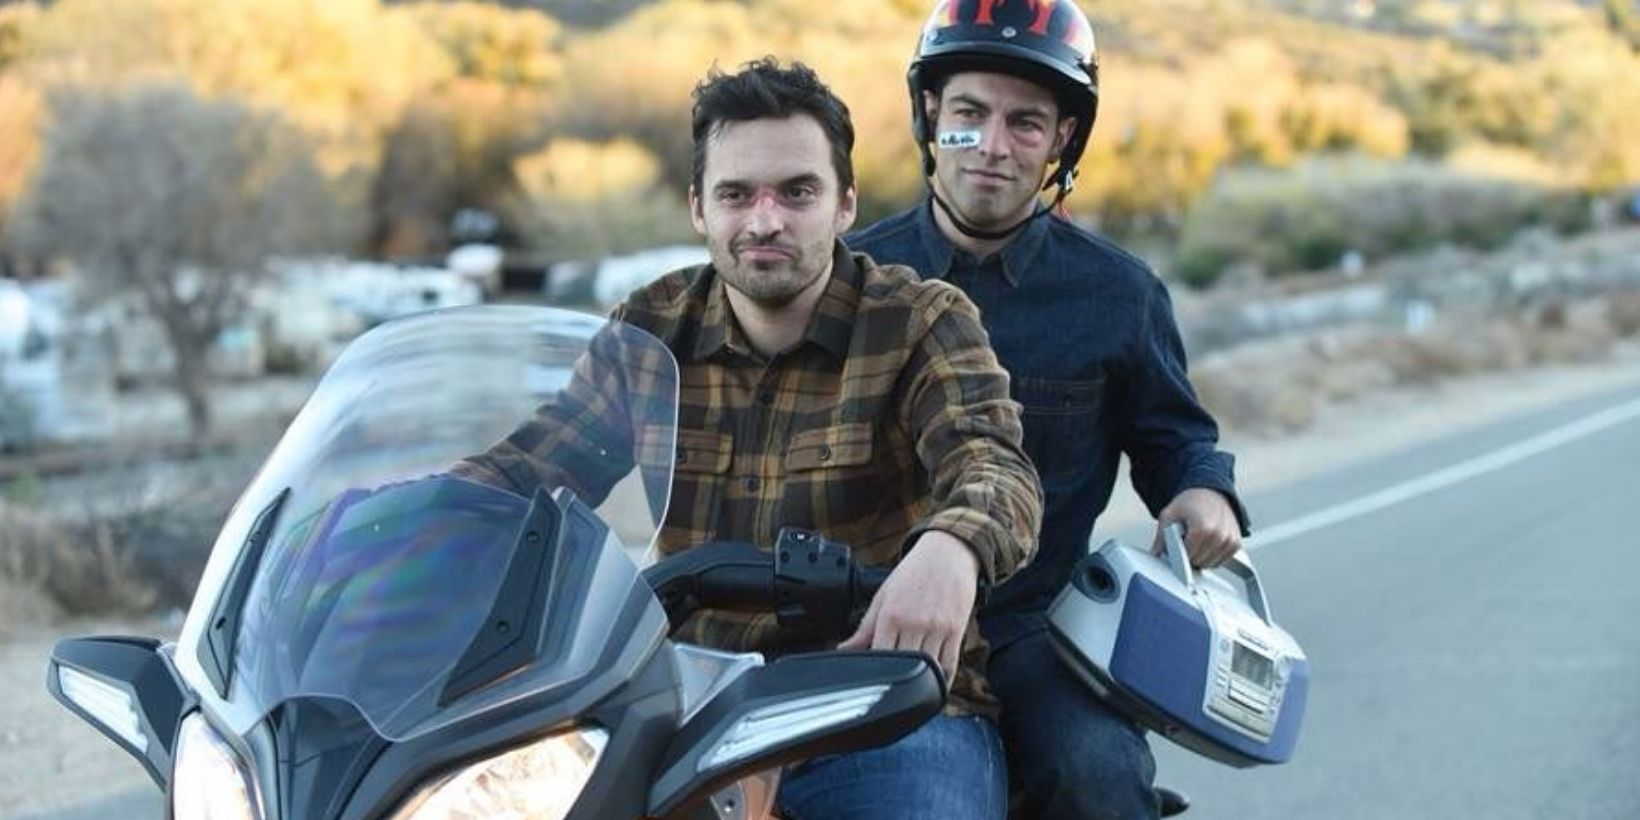 Nick and Schmidt ride on a motorcycle together in New Girl